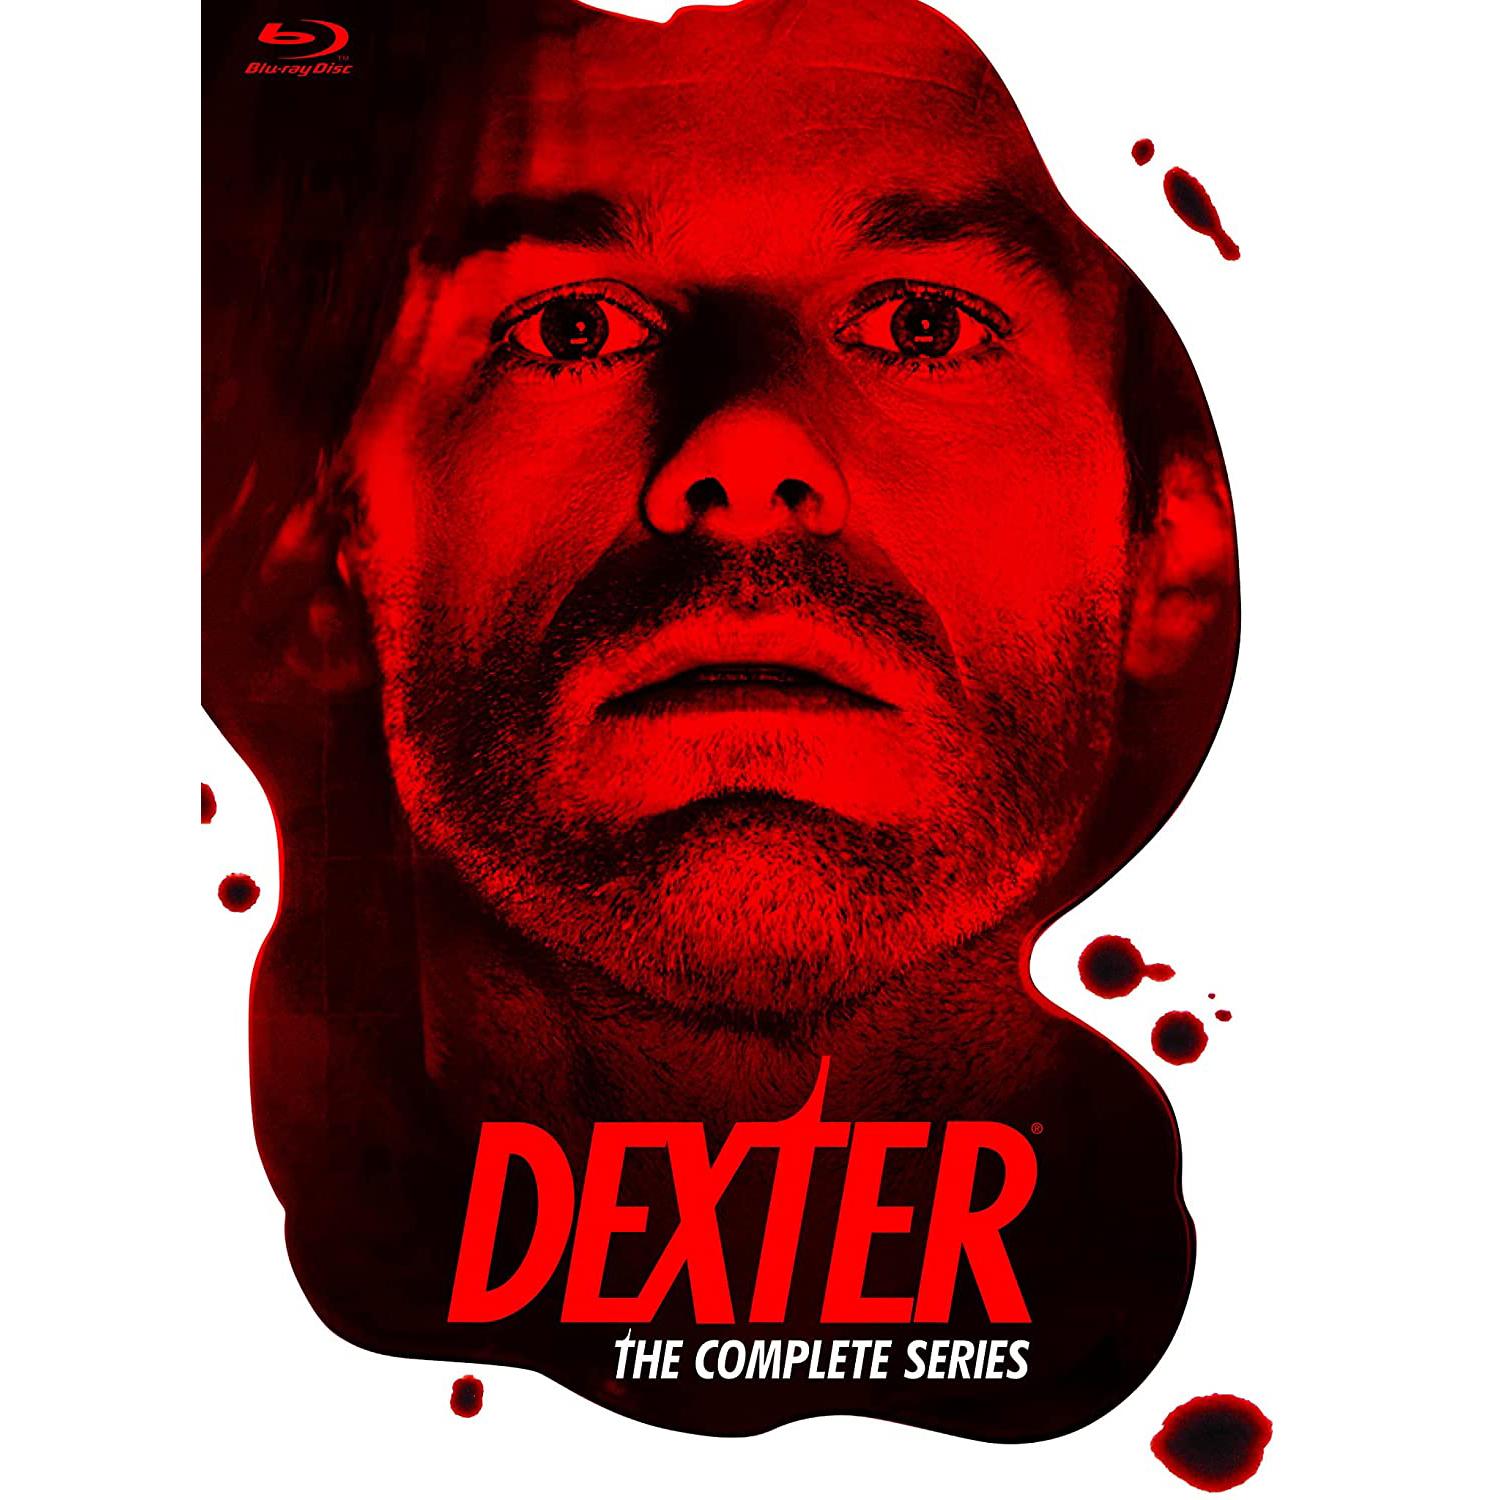 Dexter The Complete Series Blu-ray for $69.29 Shipped